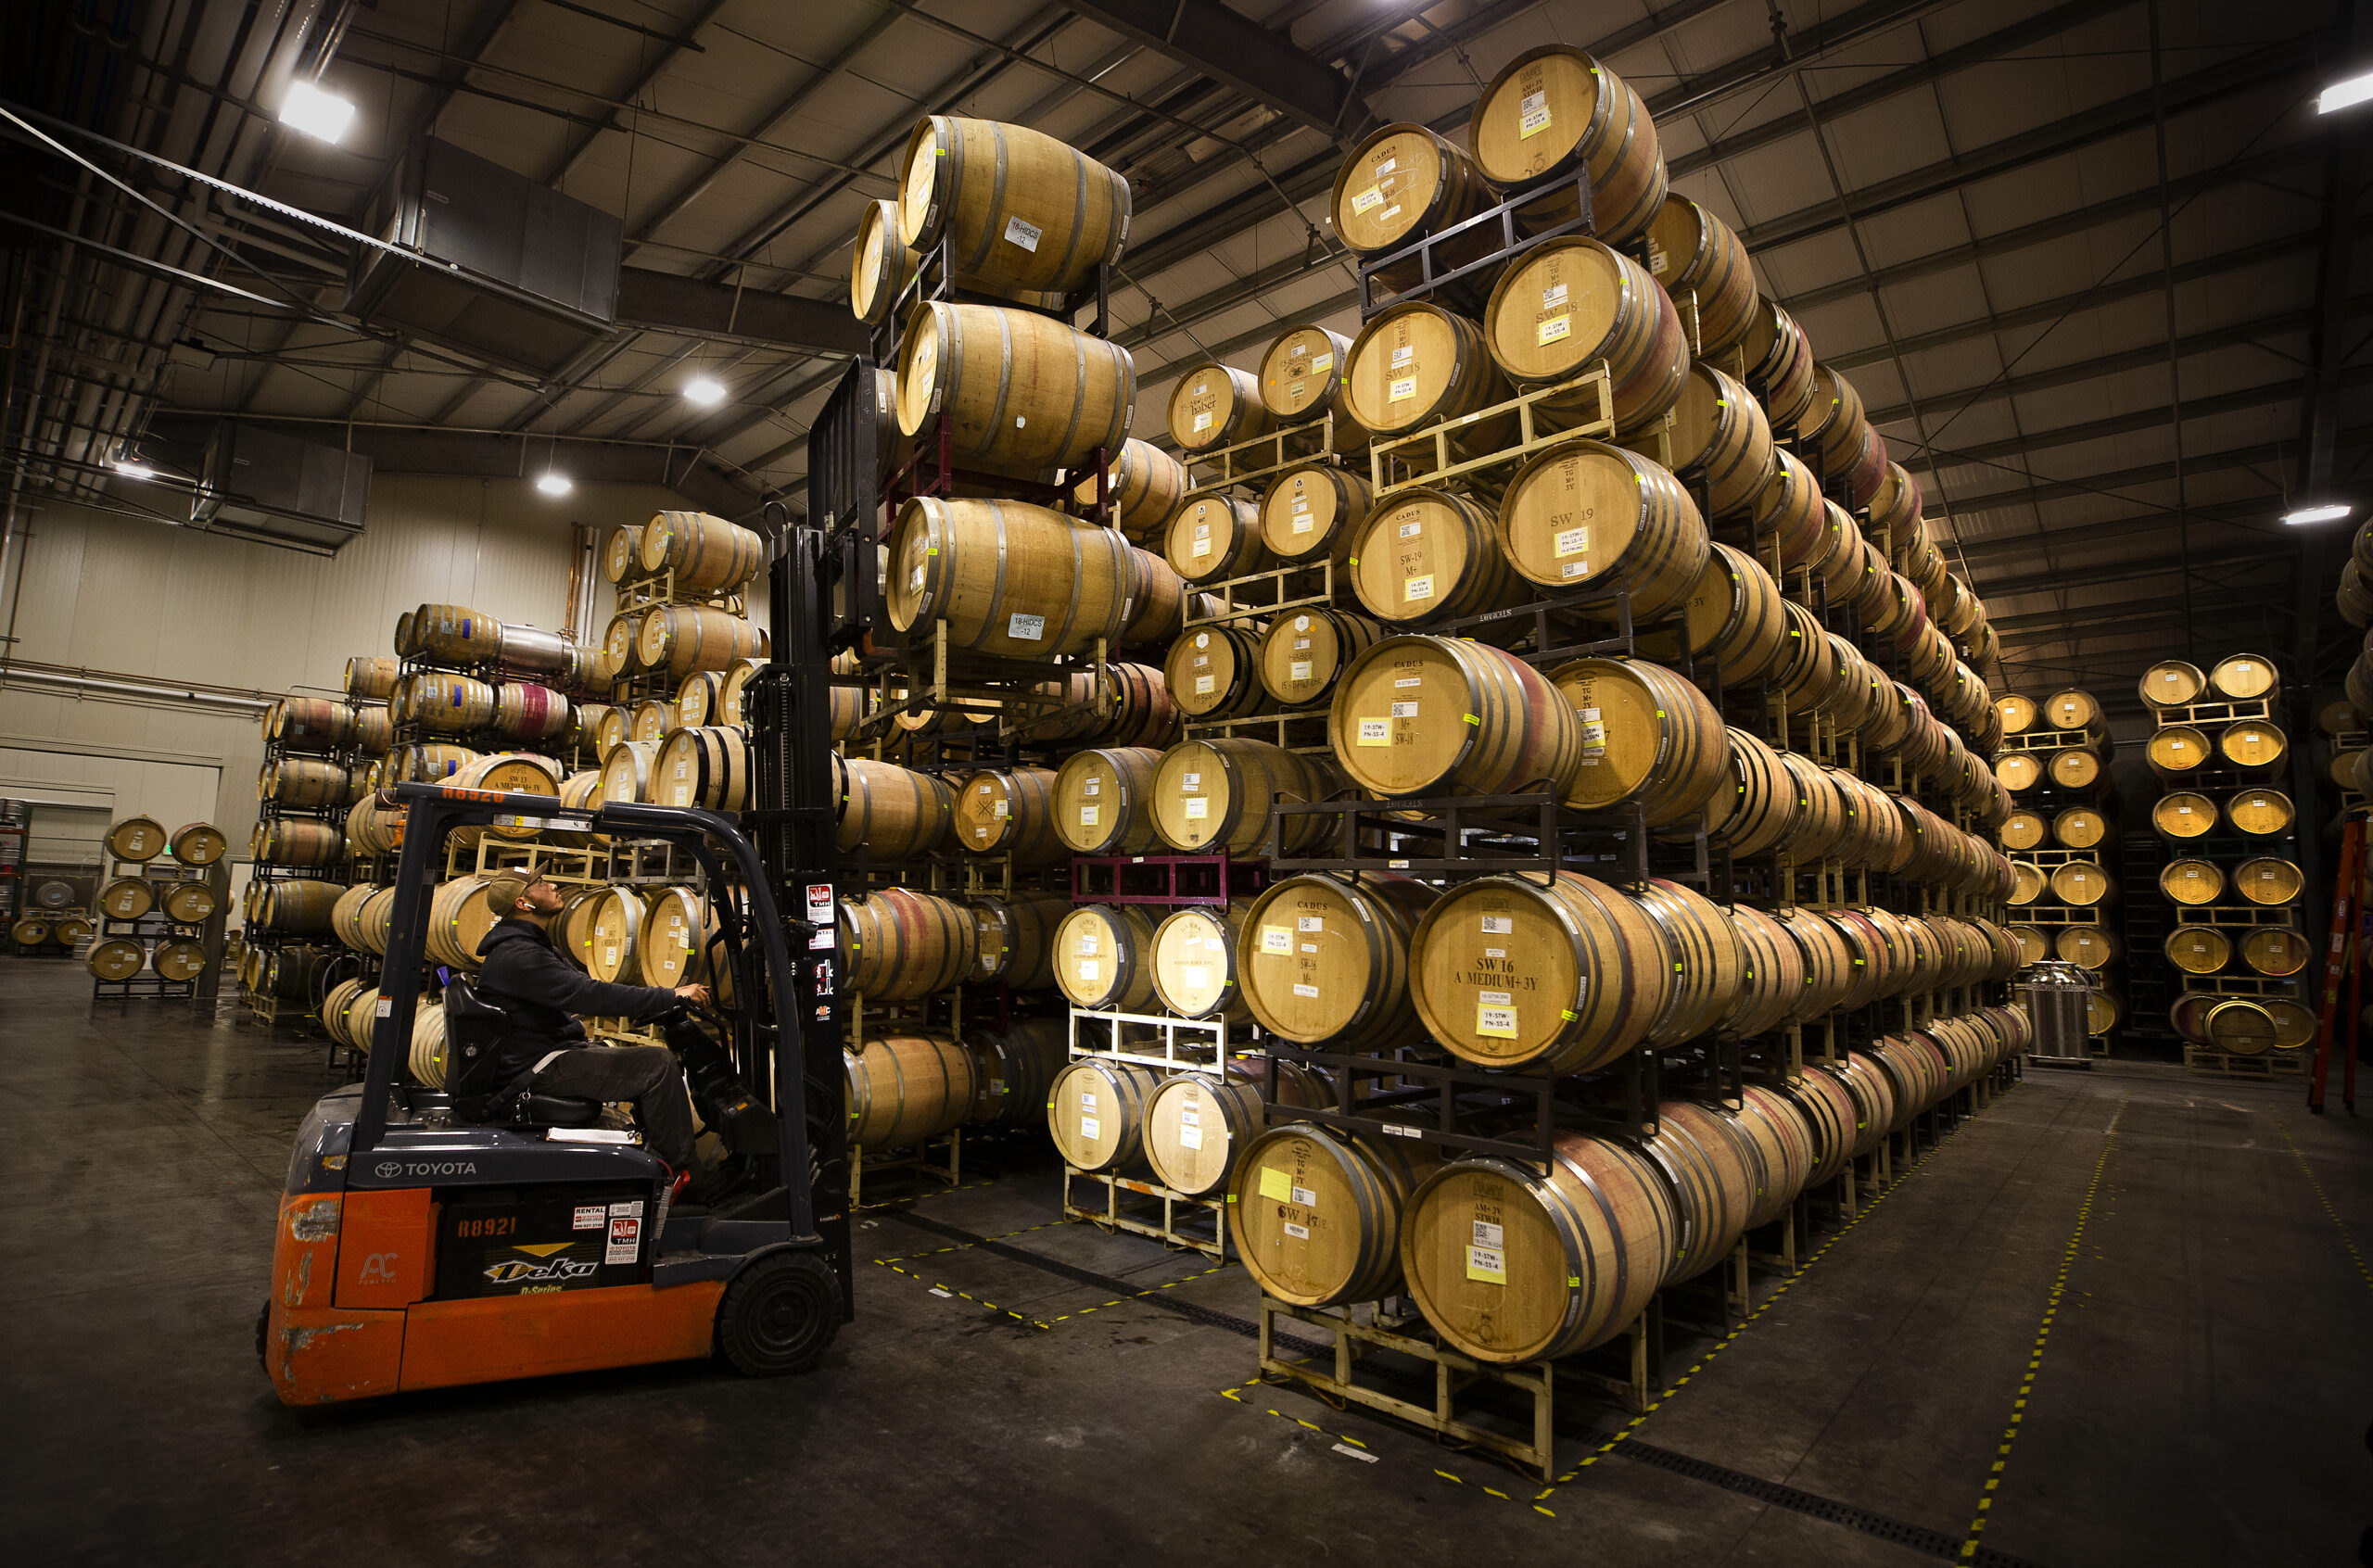 The main barrel storage room at Sugarloaf Crush in Oakmont has a capacity of 4500+ barrels in a temperature controlled environment. (photo by John Burgess/Sonoma Magazine)